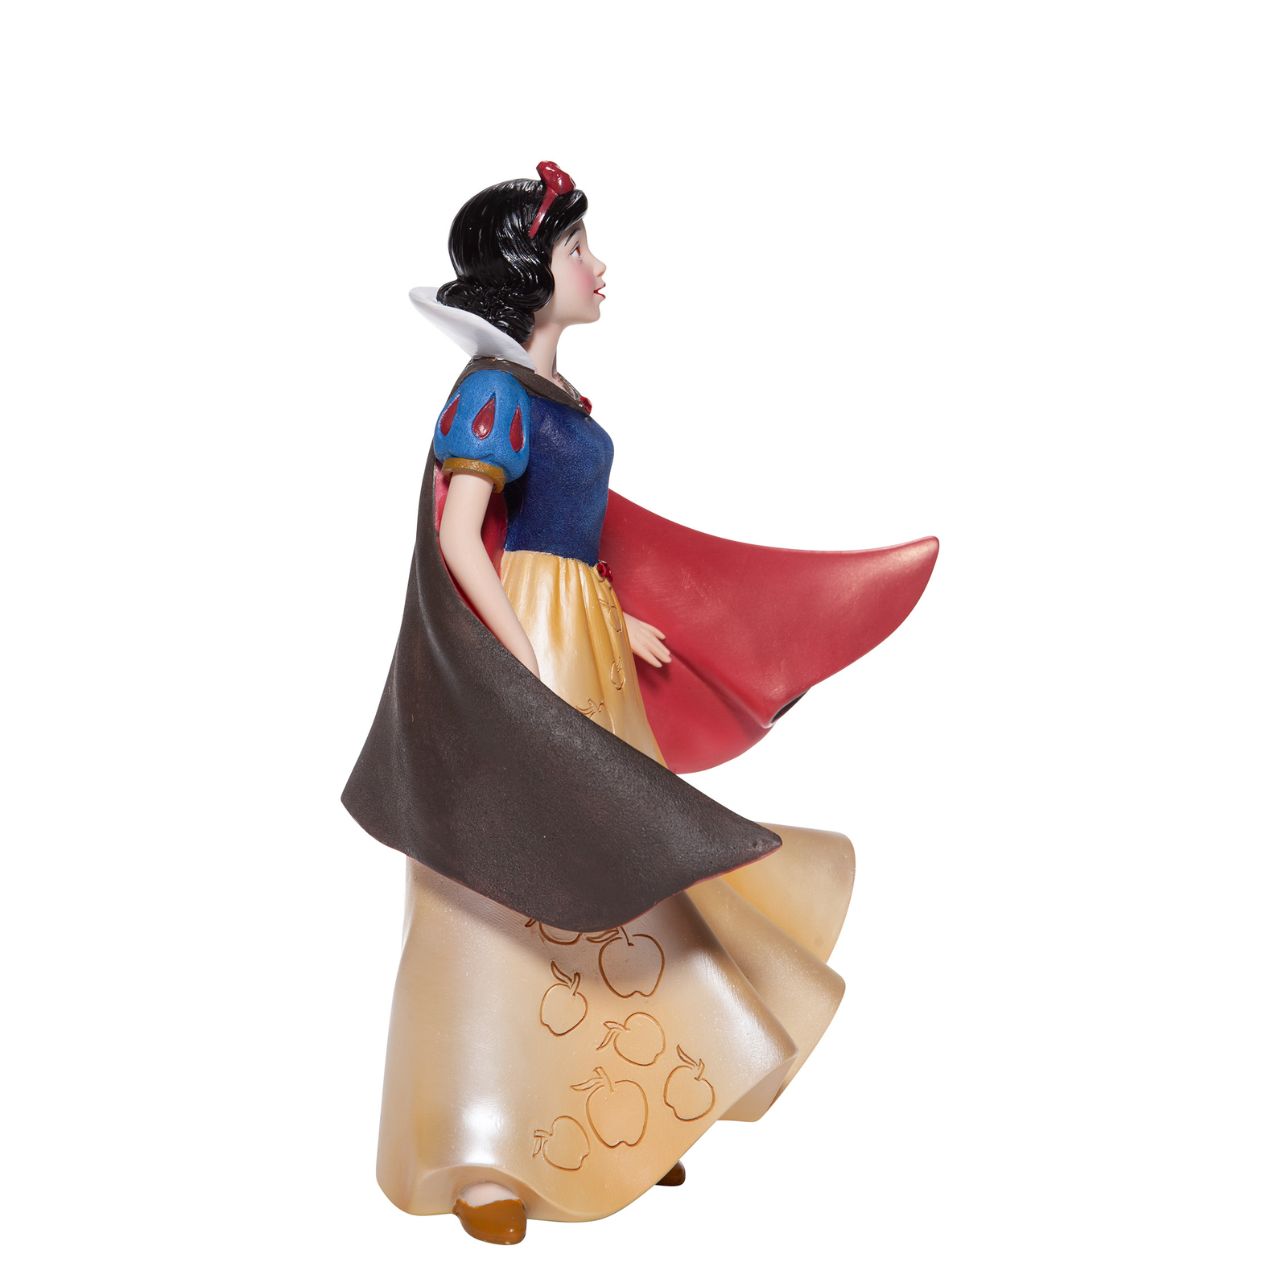 Snow White Couture de Force Figurine  Snow White with her skin fair as snow and lips red as apples follows the wind on a new adventure fit for a princess. Hand-crafted and hand-painted, her iconic outfit shimmers in yellow satins and dark wool felts plussed with red faux gem stones.